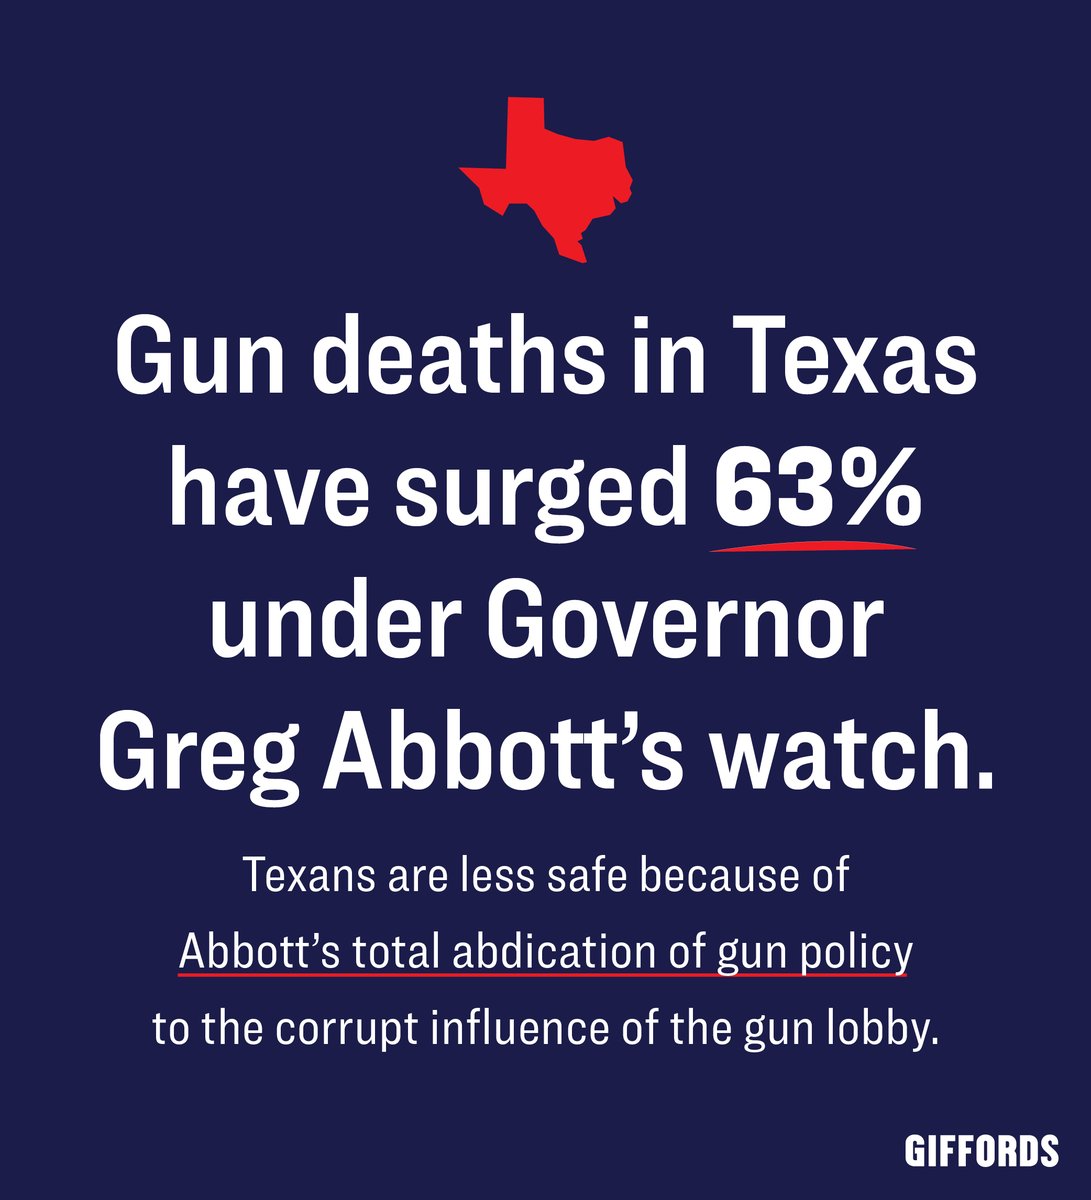 Gov. Abbott says public safety is a top priority of his administration, but the facts tell a different story. Since being elected, Abbott has weakened Texas’s gun laws and prioritized the gun lobby’s extremist agenda over the safety of Texas families.